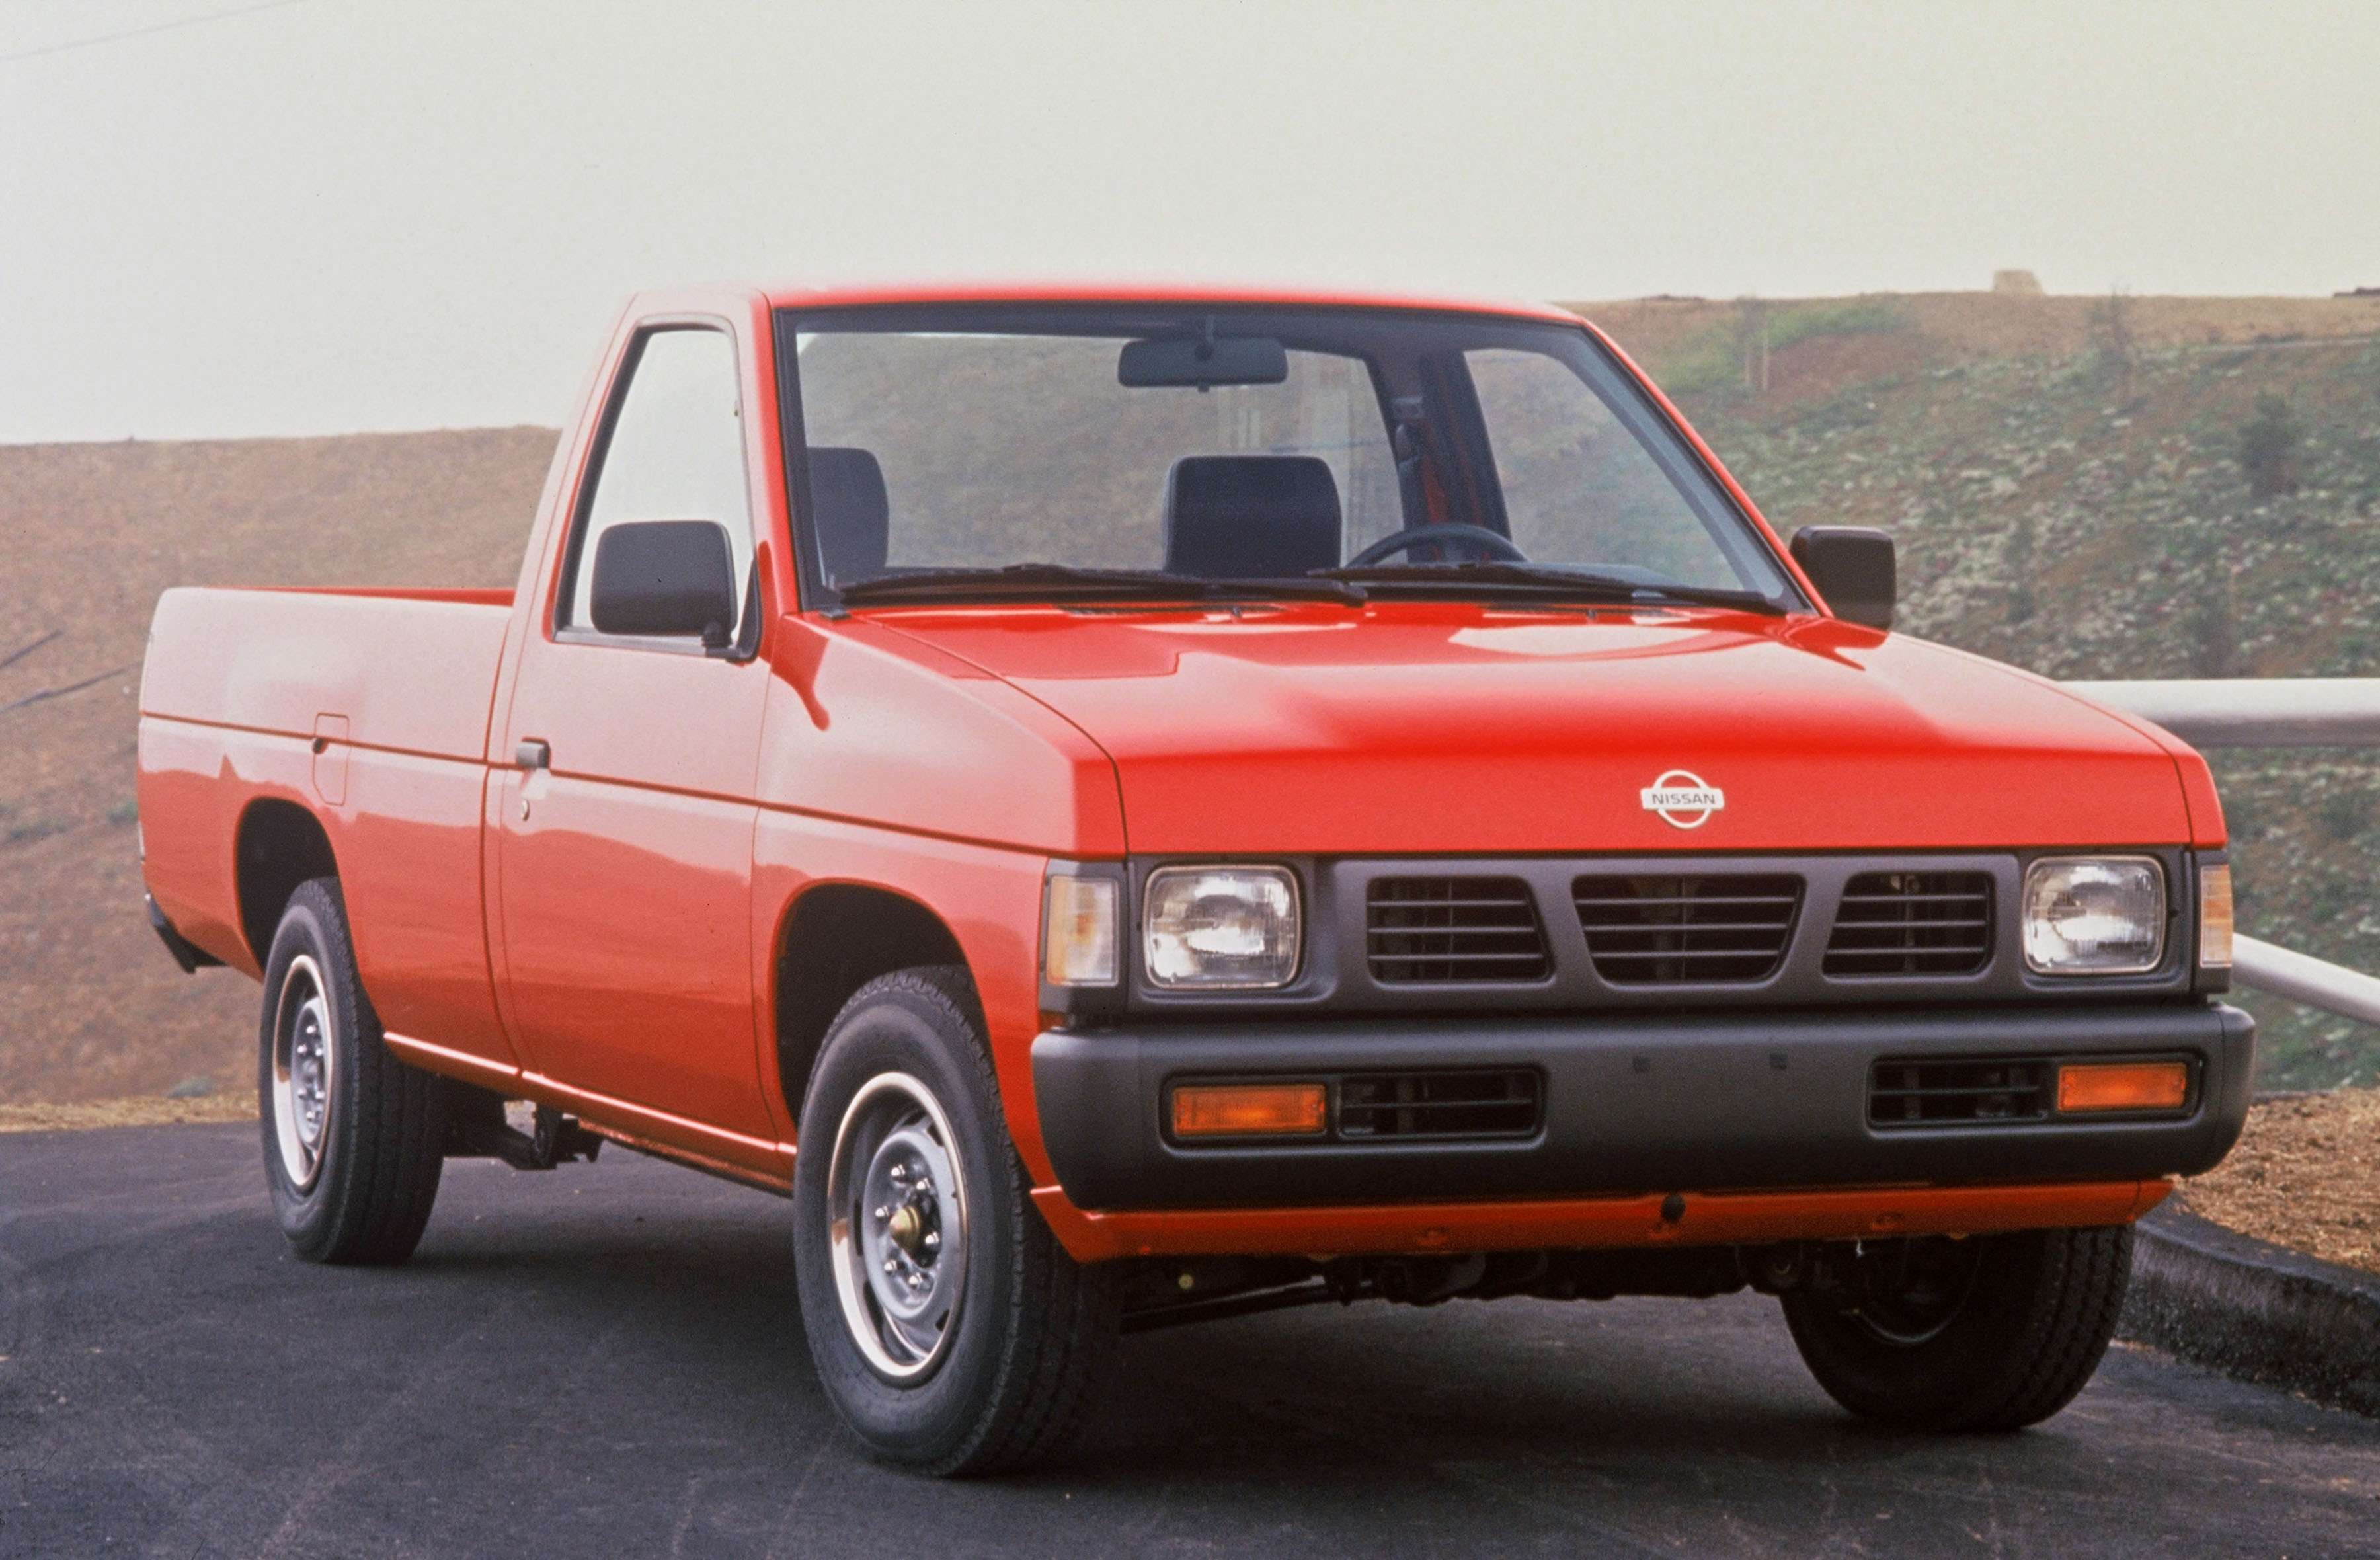 Getting to Know the Nissan D21 Hardbody Nissan Forum